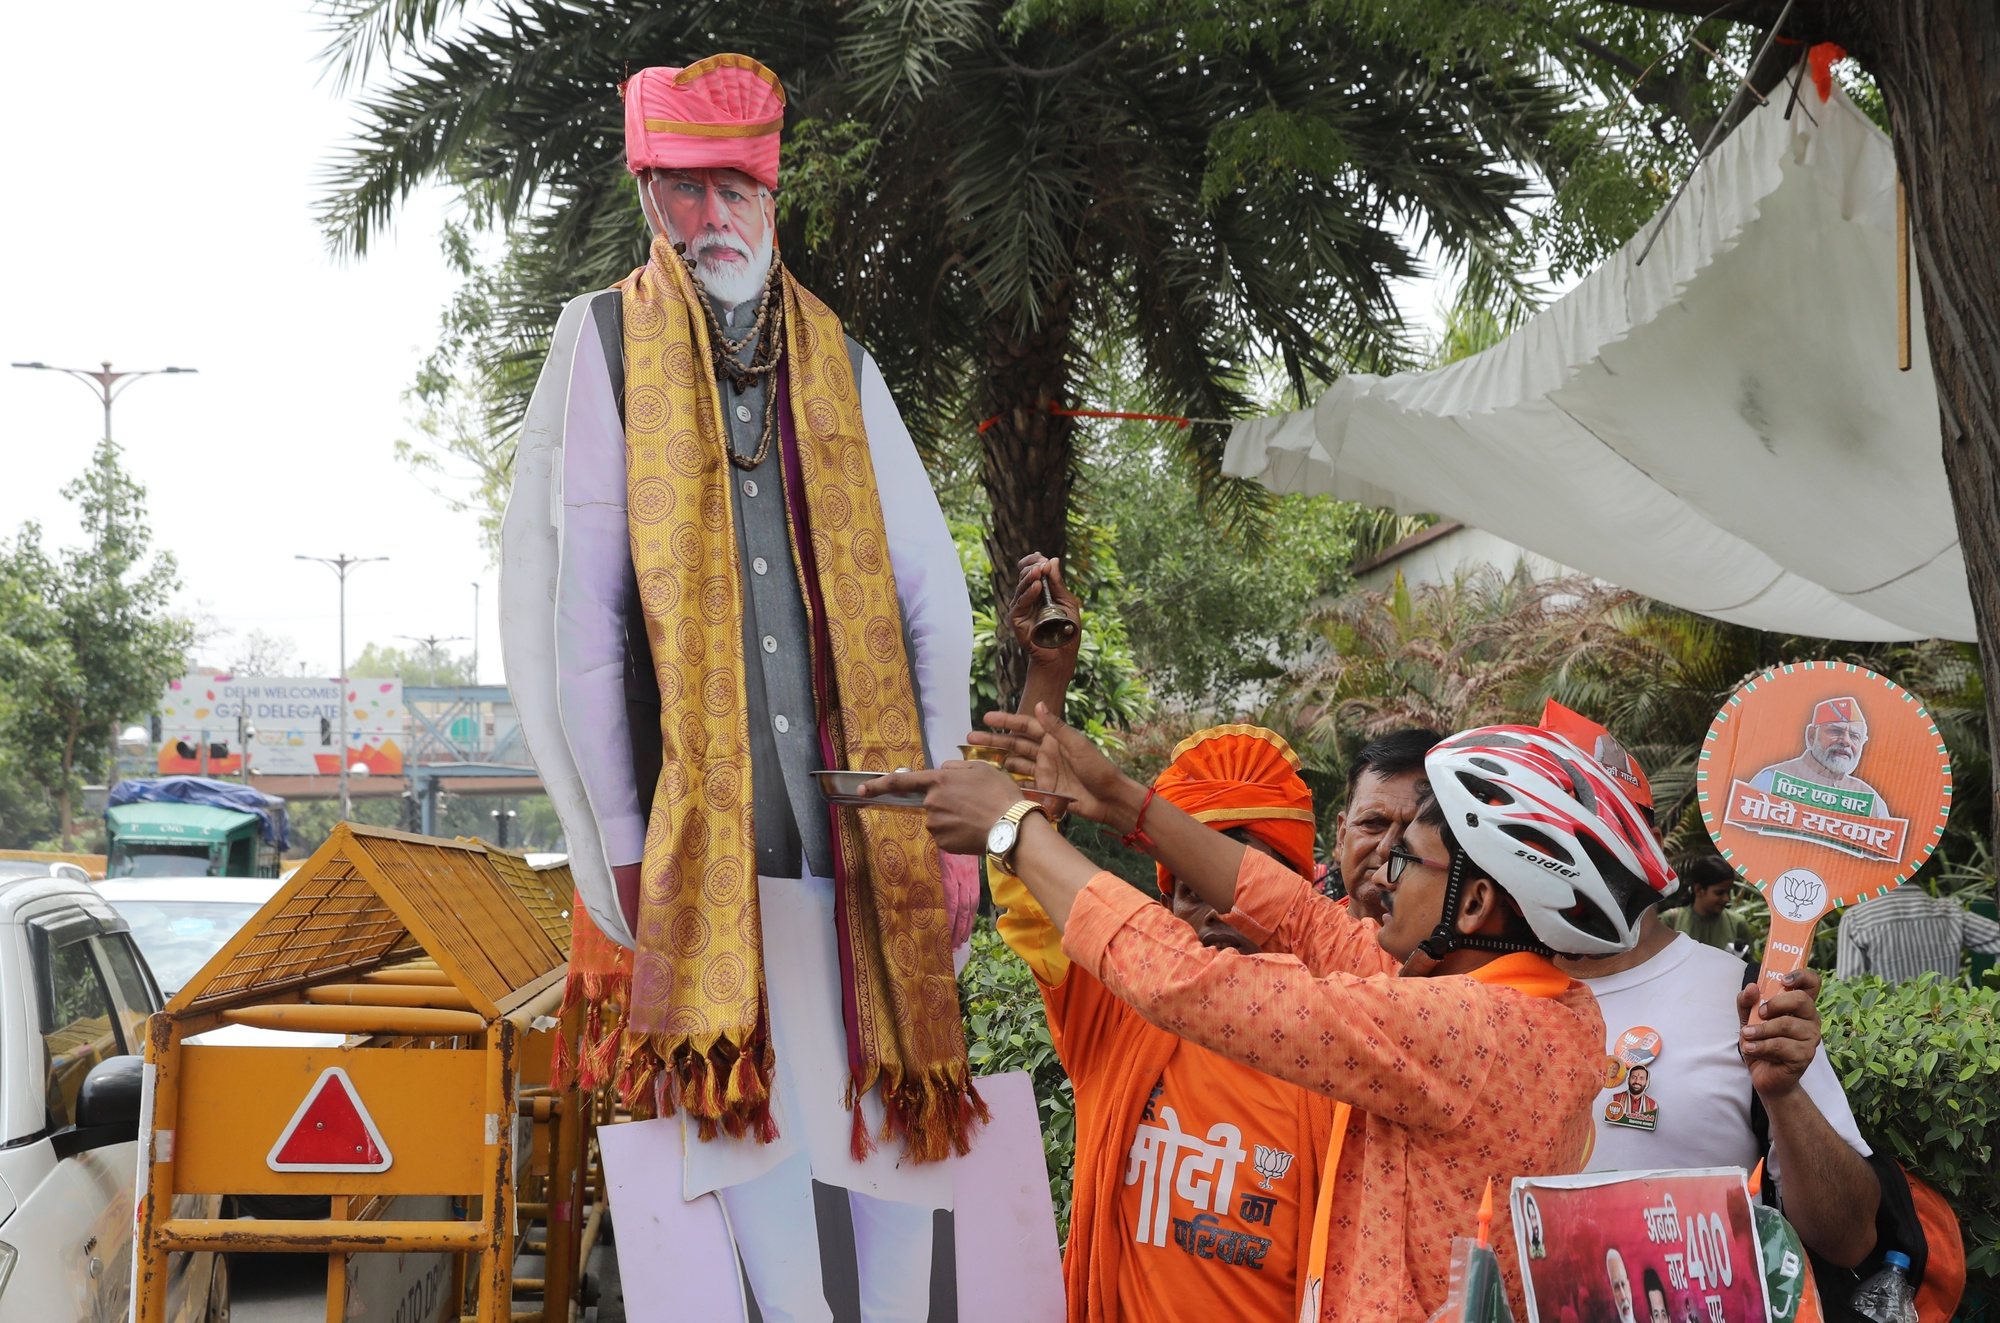 epa11388542 Bharatiya Janata Party (BJP) supporters celebrate their party&#039;s lead in the election results, with a cardboard cutout figure of Prime Minsiter Narendra Modi, at the BJP headquarters in New Delhi, India, 04 June 2024. Counting for the general election results has started for India&#039;s 545-member lower house of parliament, or Lok Sabha, with early trends showing the Bharatiya Janata Party and its National Democratic Alliance (NDA) leading.  EPA/RAJAT GUPTA